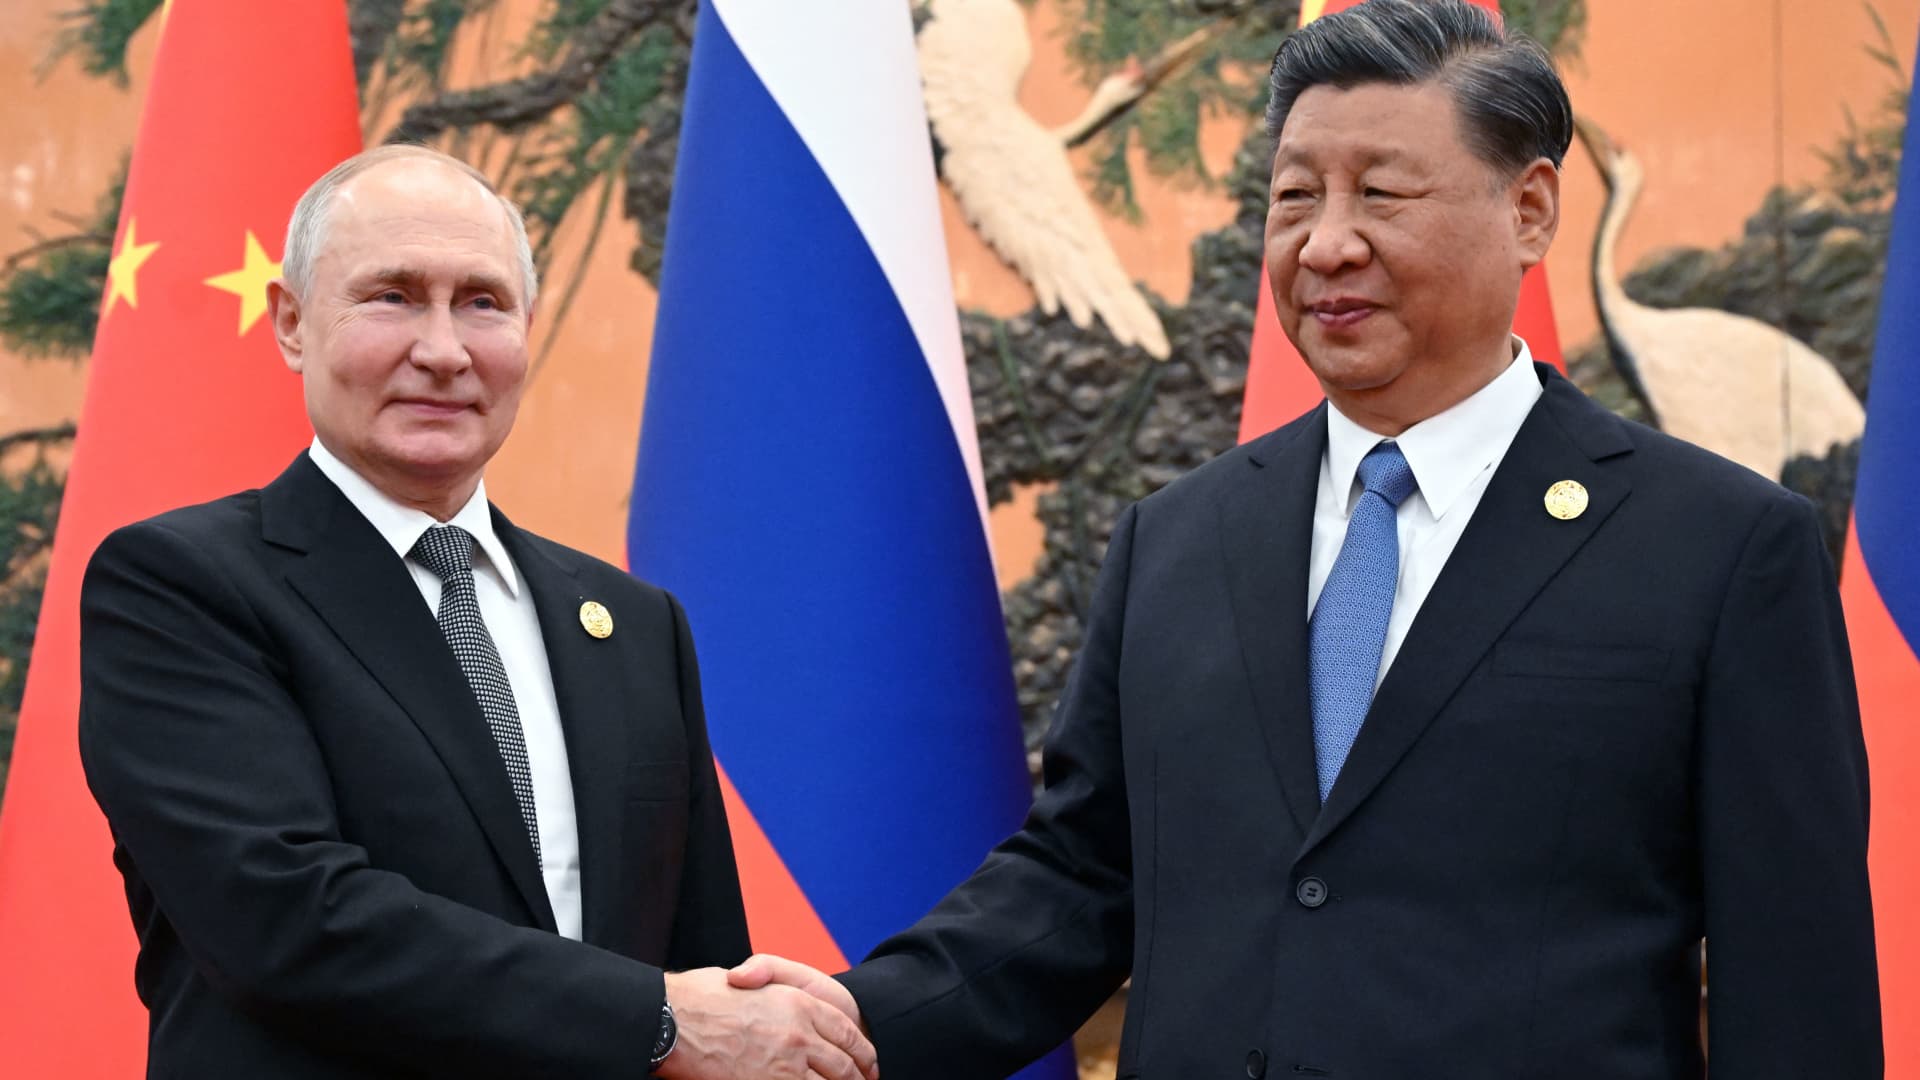 This pool photograph distributed by Russian state owned agency Sputnik shows Russia's President Vladimir Putin and Chinese President Xi Jinping shaking hands during a meeting in Beijing on October 18, 2023. 